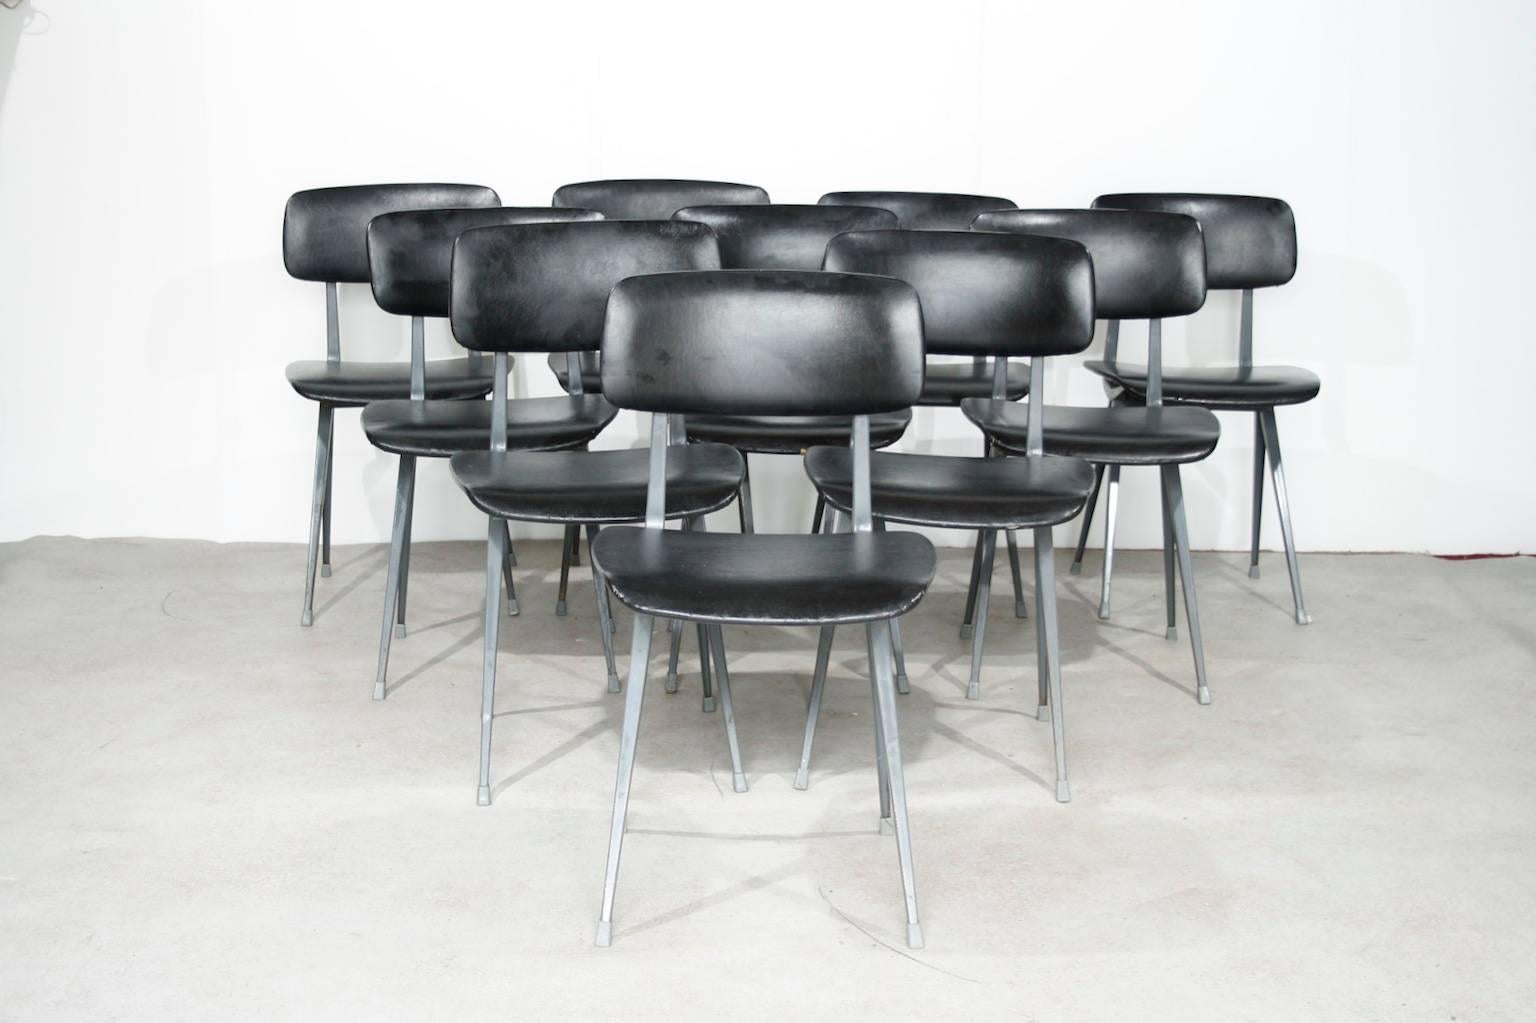 Set of ten Result chairs with a light-grey metal frame and the original black faux-leather upholstery.
They all have signs of use, like rust to the frame, and around three chairs have some small holes in the fabric.
Most of them are still marked